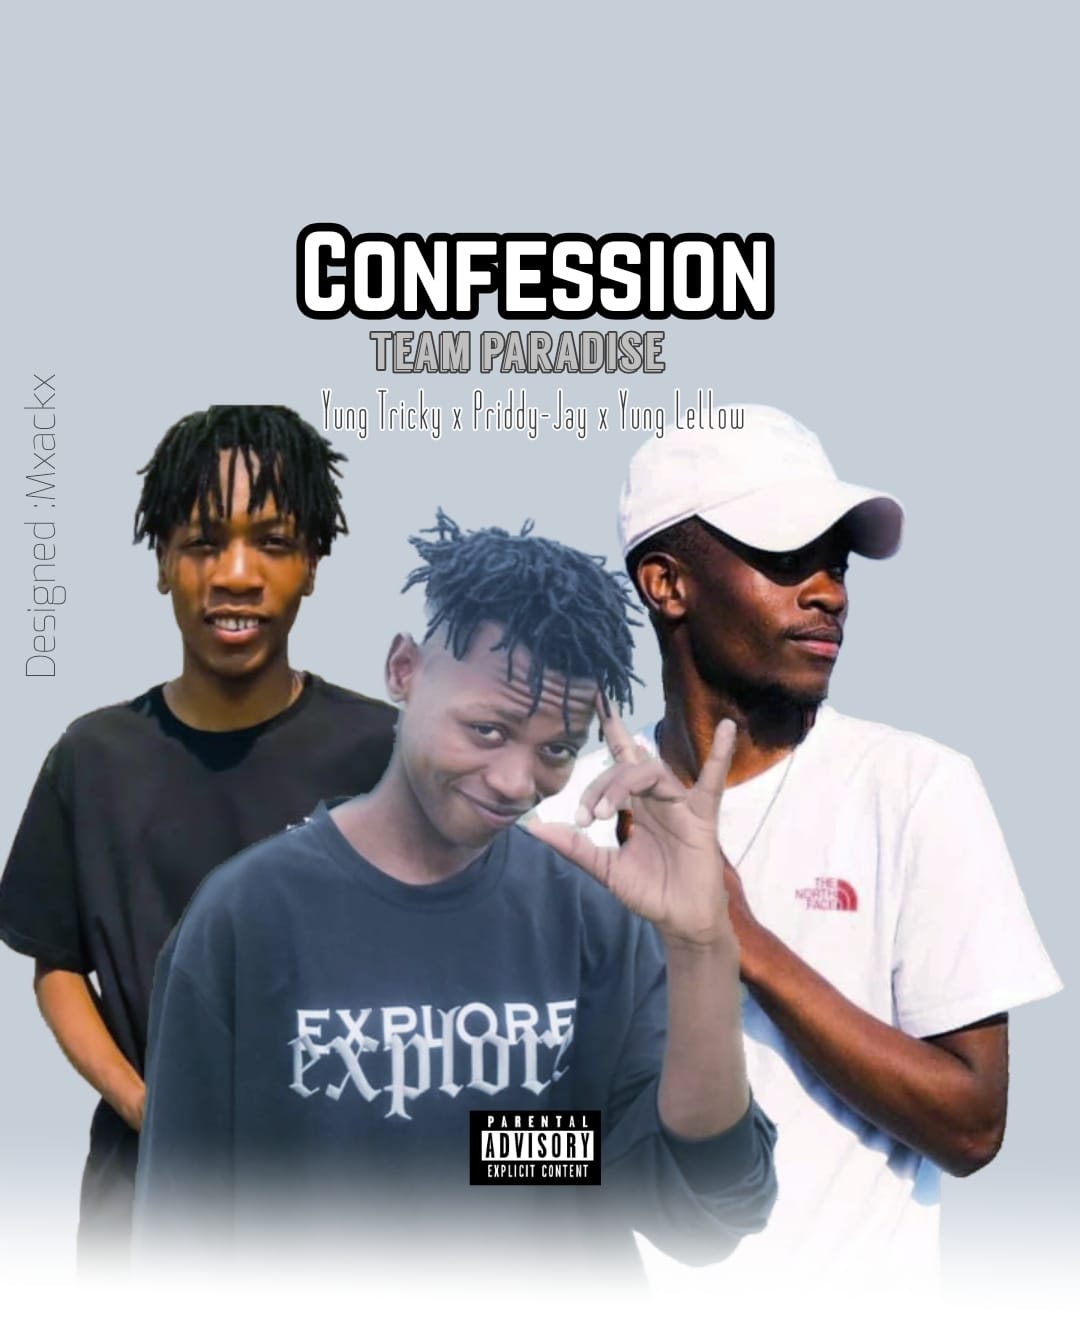 CONFESSION - Yung Tricky X Priddy Jay X Yung Lellow